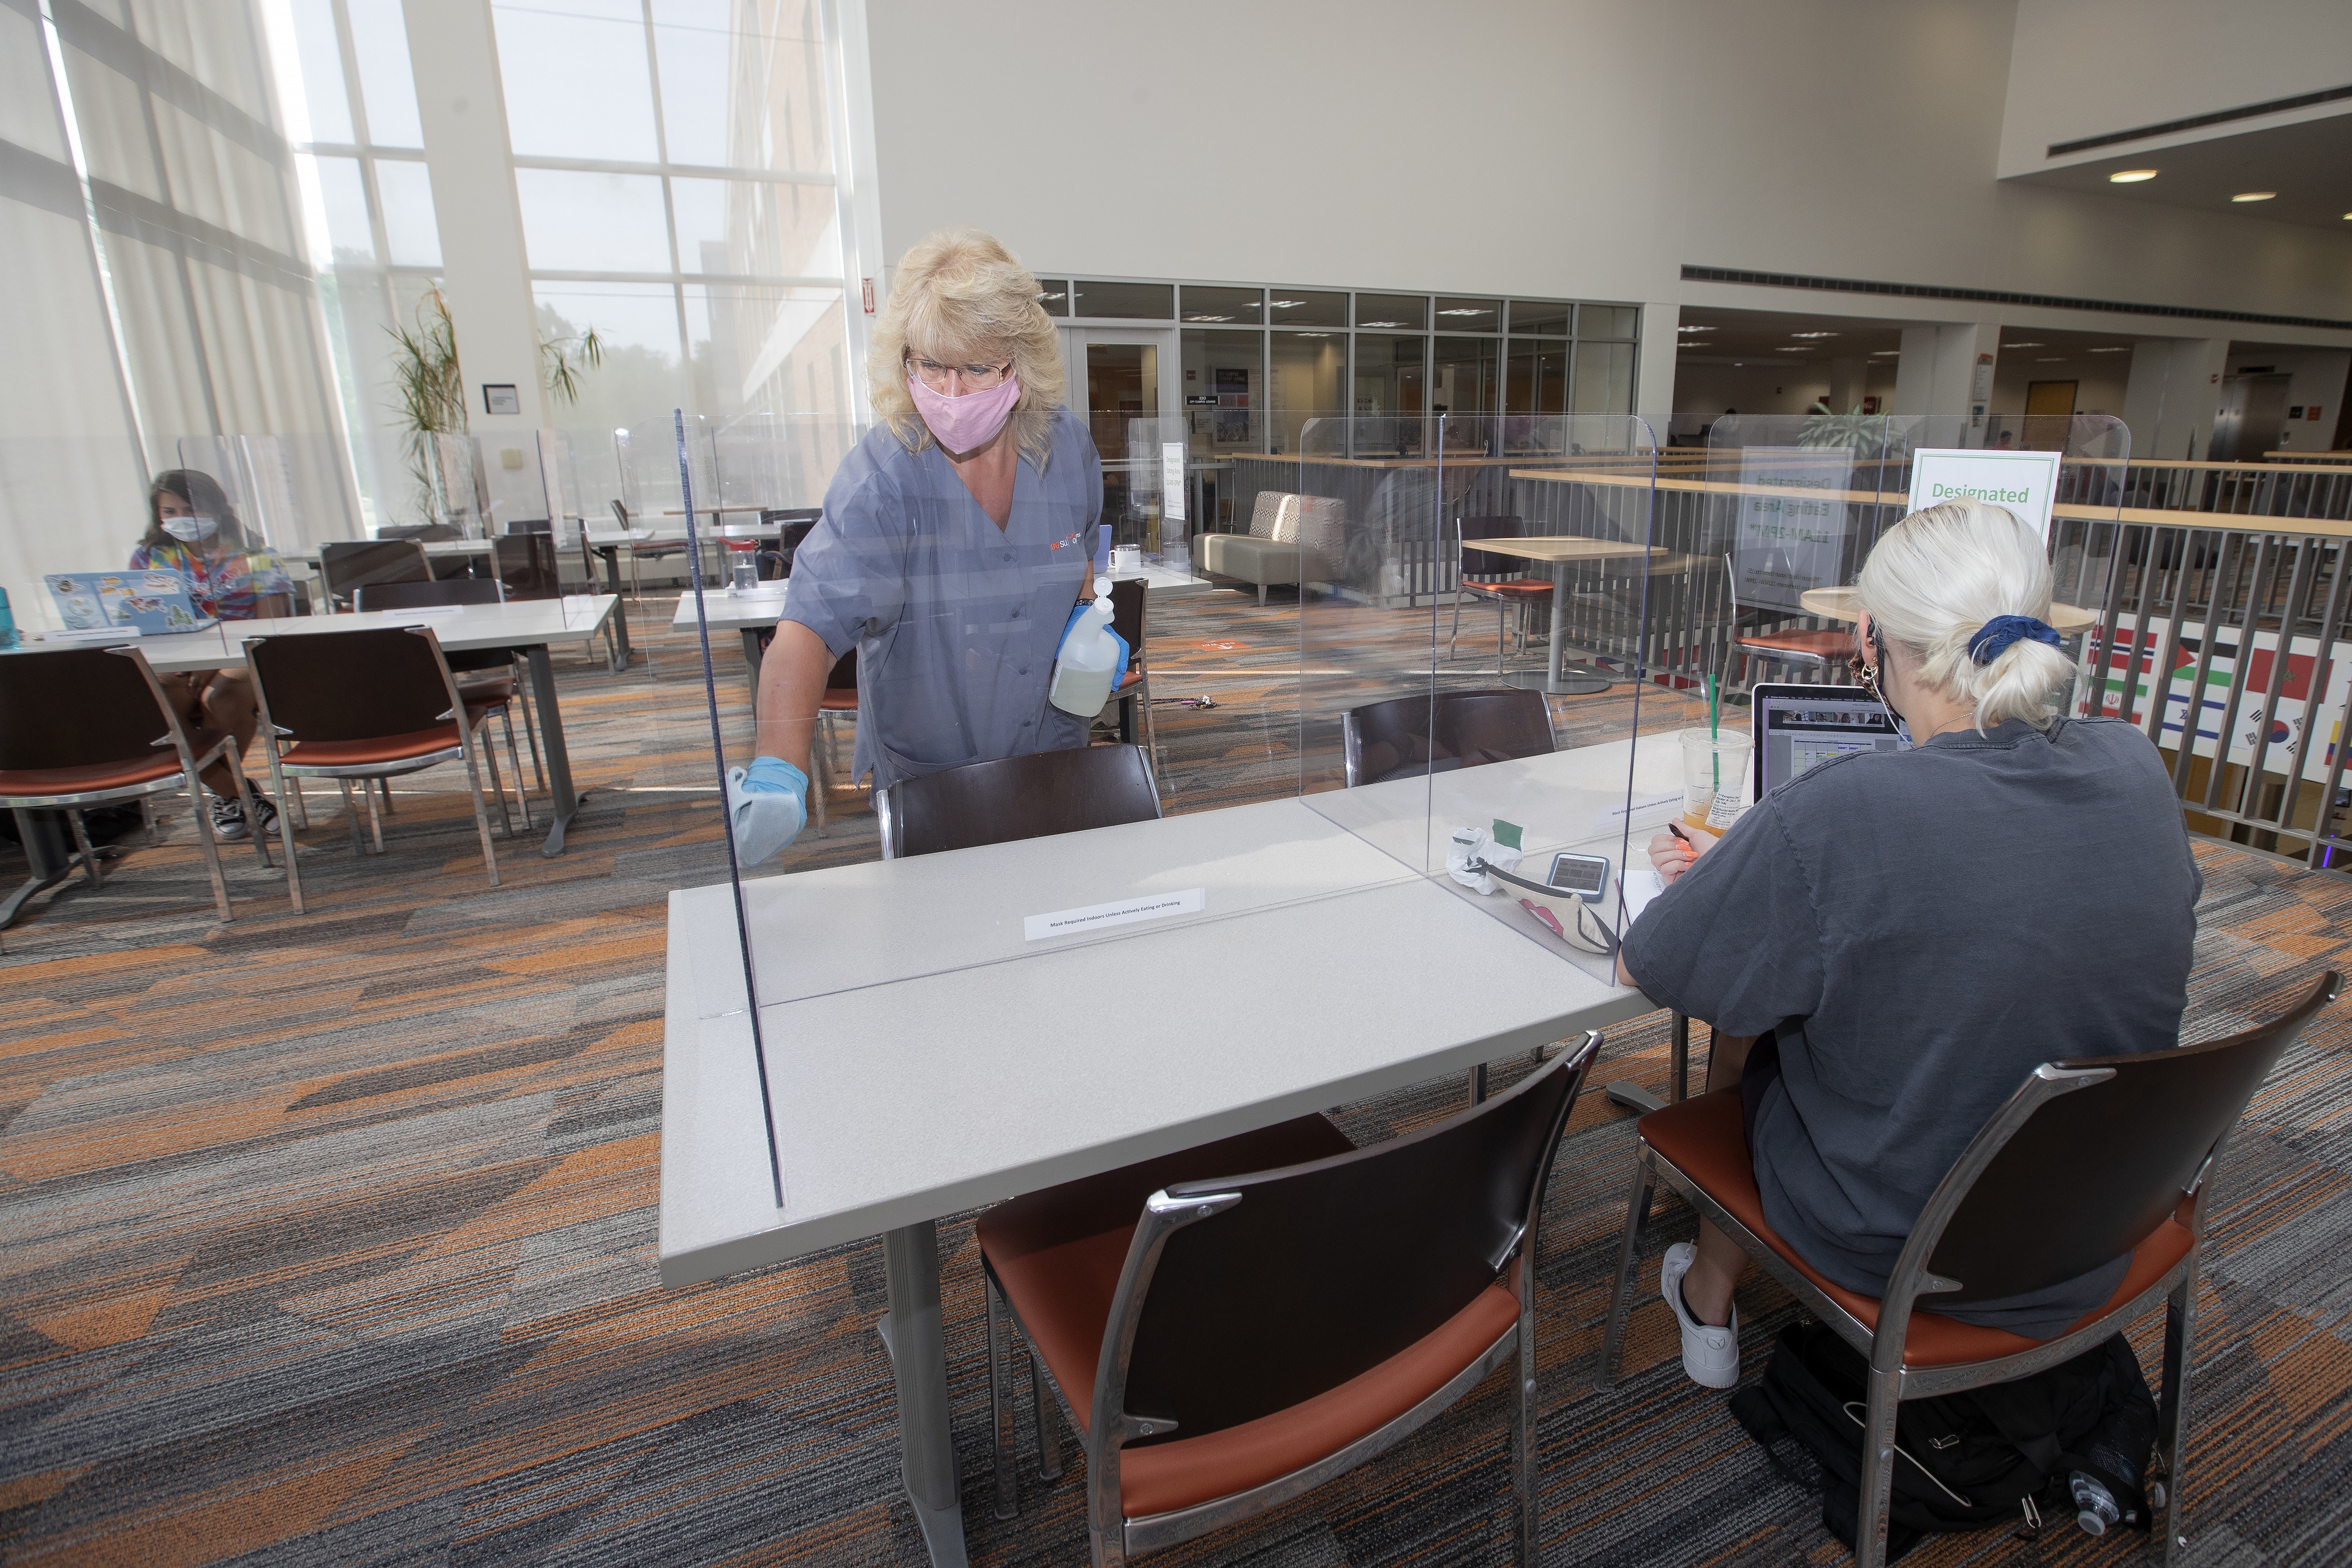 Campus Operations staff member Donna Hackworth cleans a seating area